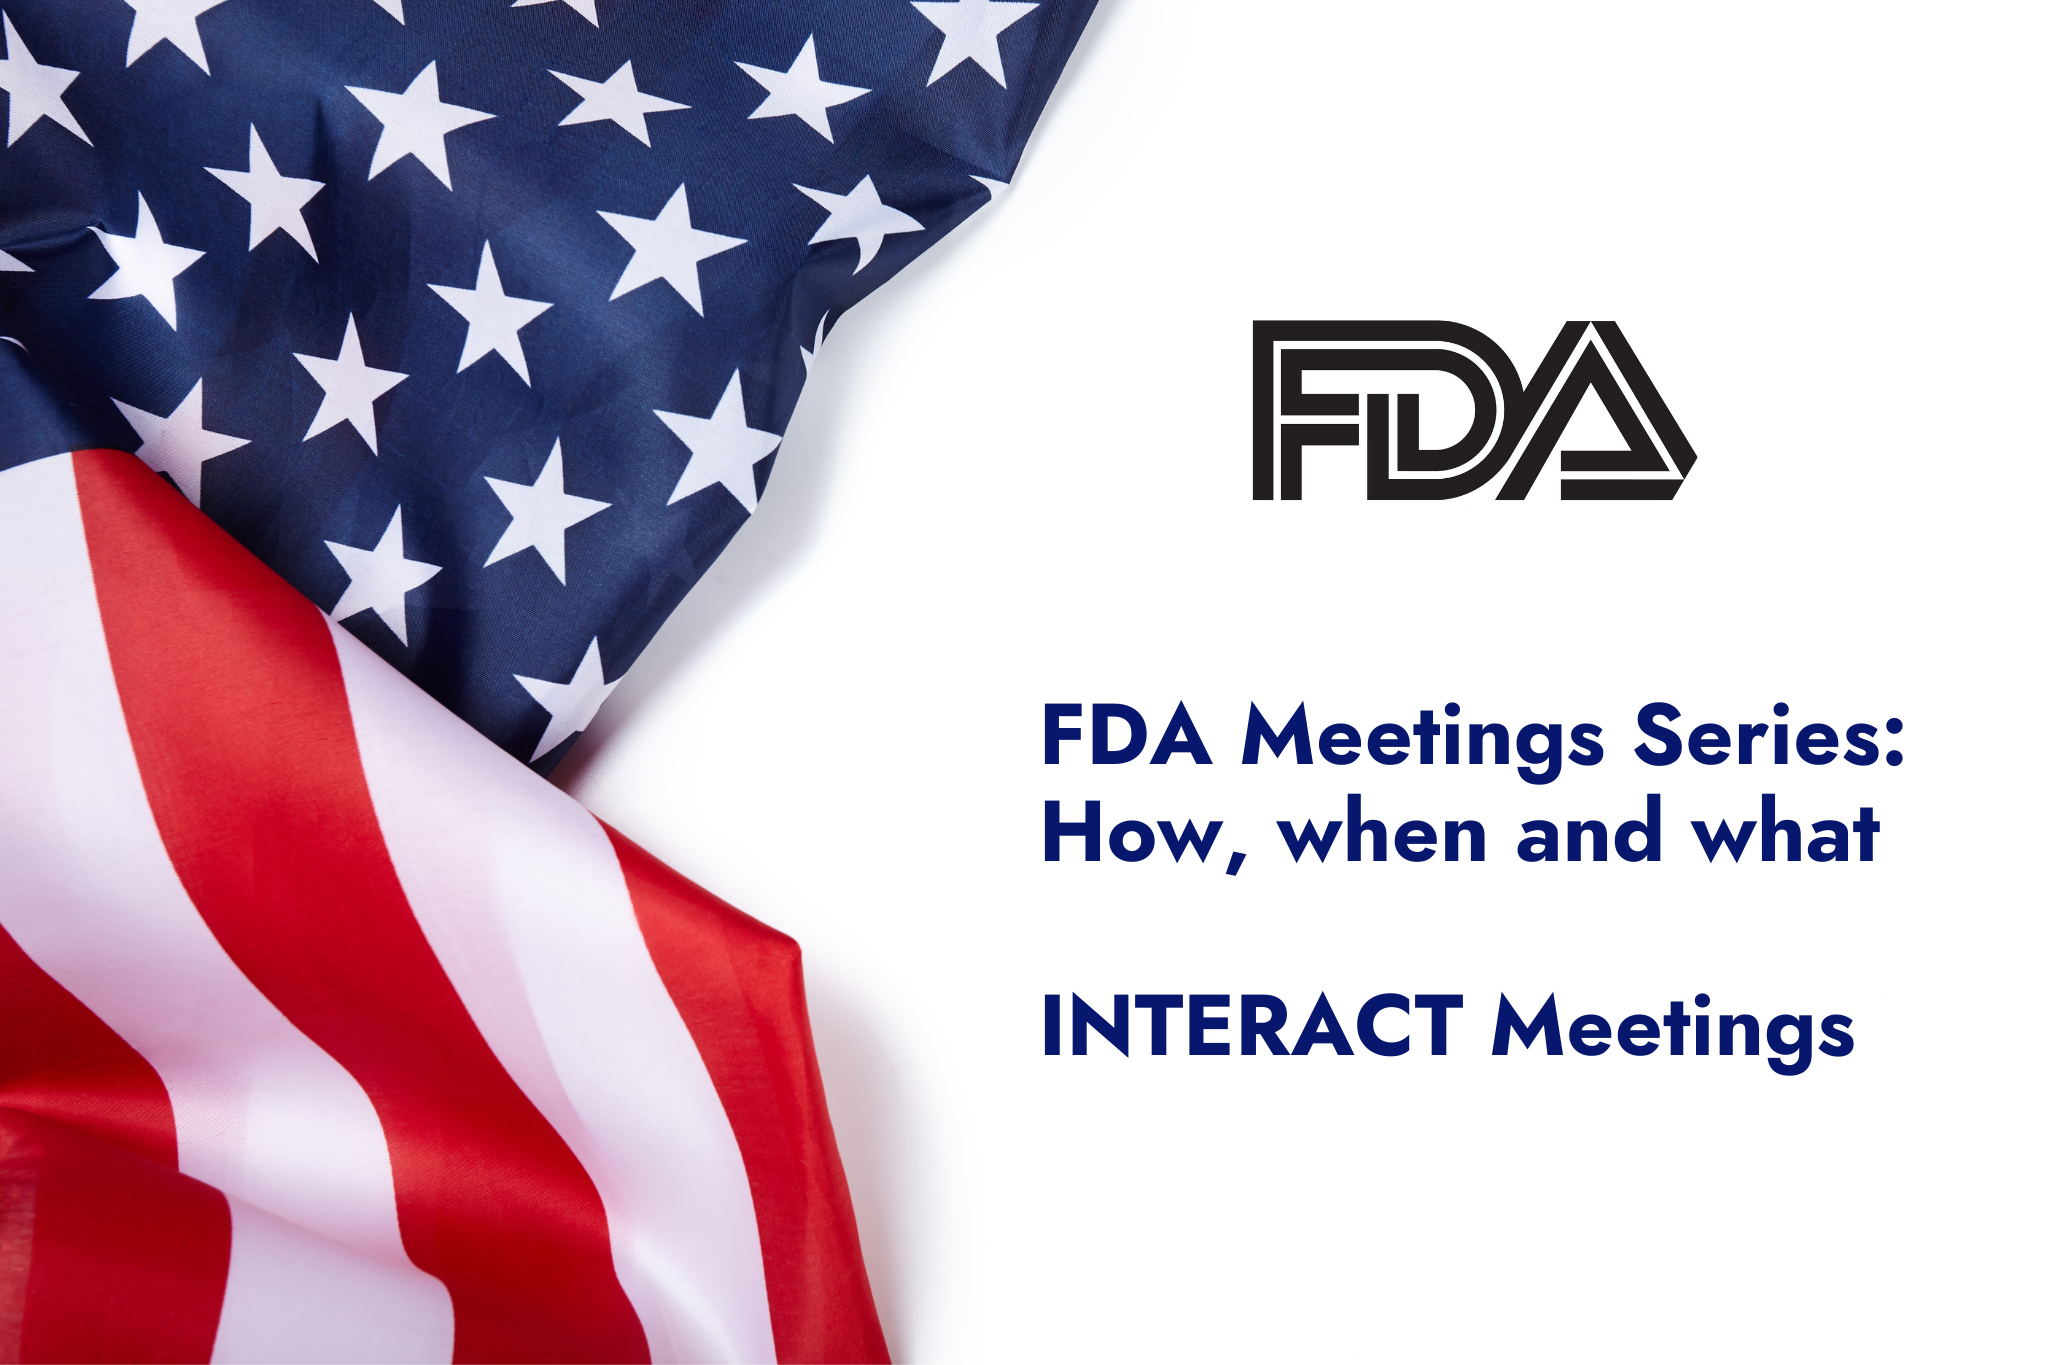 FDA Meeting Series: How, When and What - INTERACT Meetings